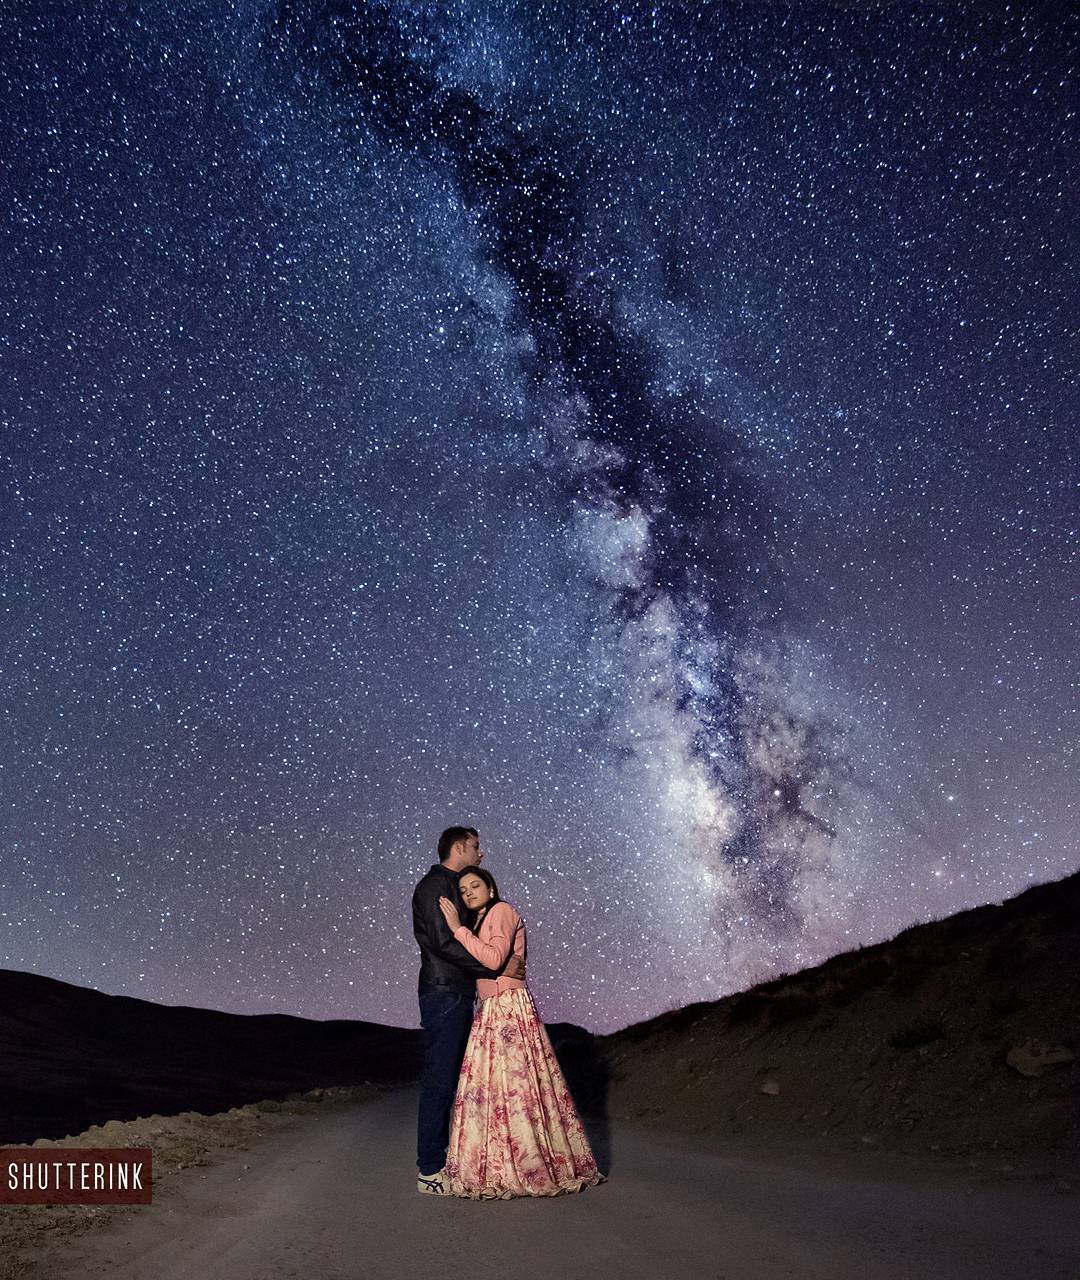 If Stargazing Is Your Thing! Fabulous Pre-Wedding Shoot Ideas for Every Kind Of Couple!